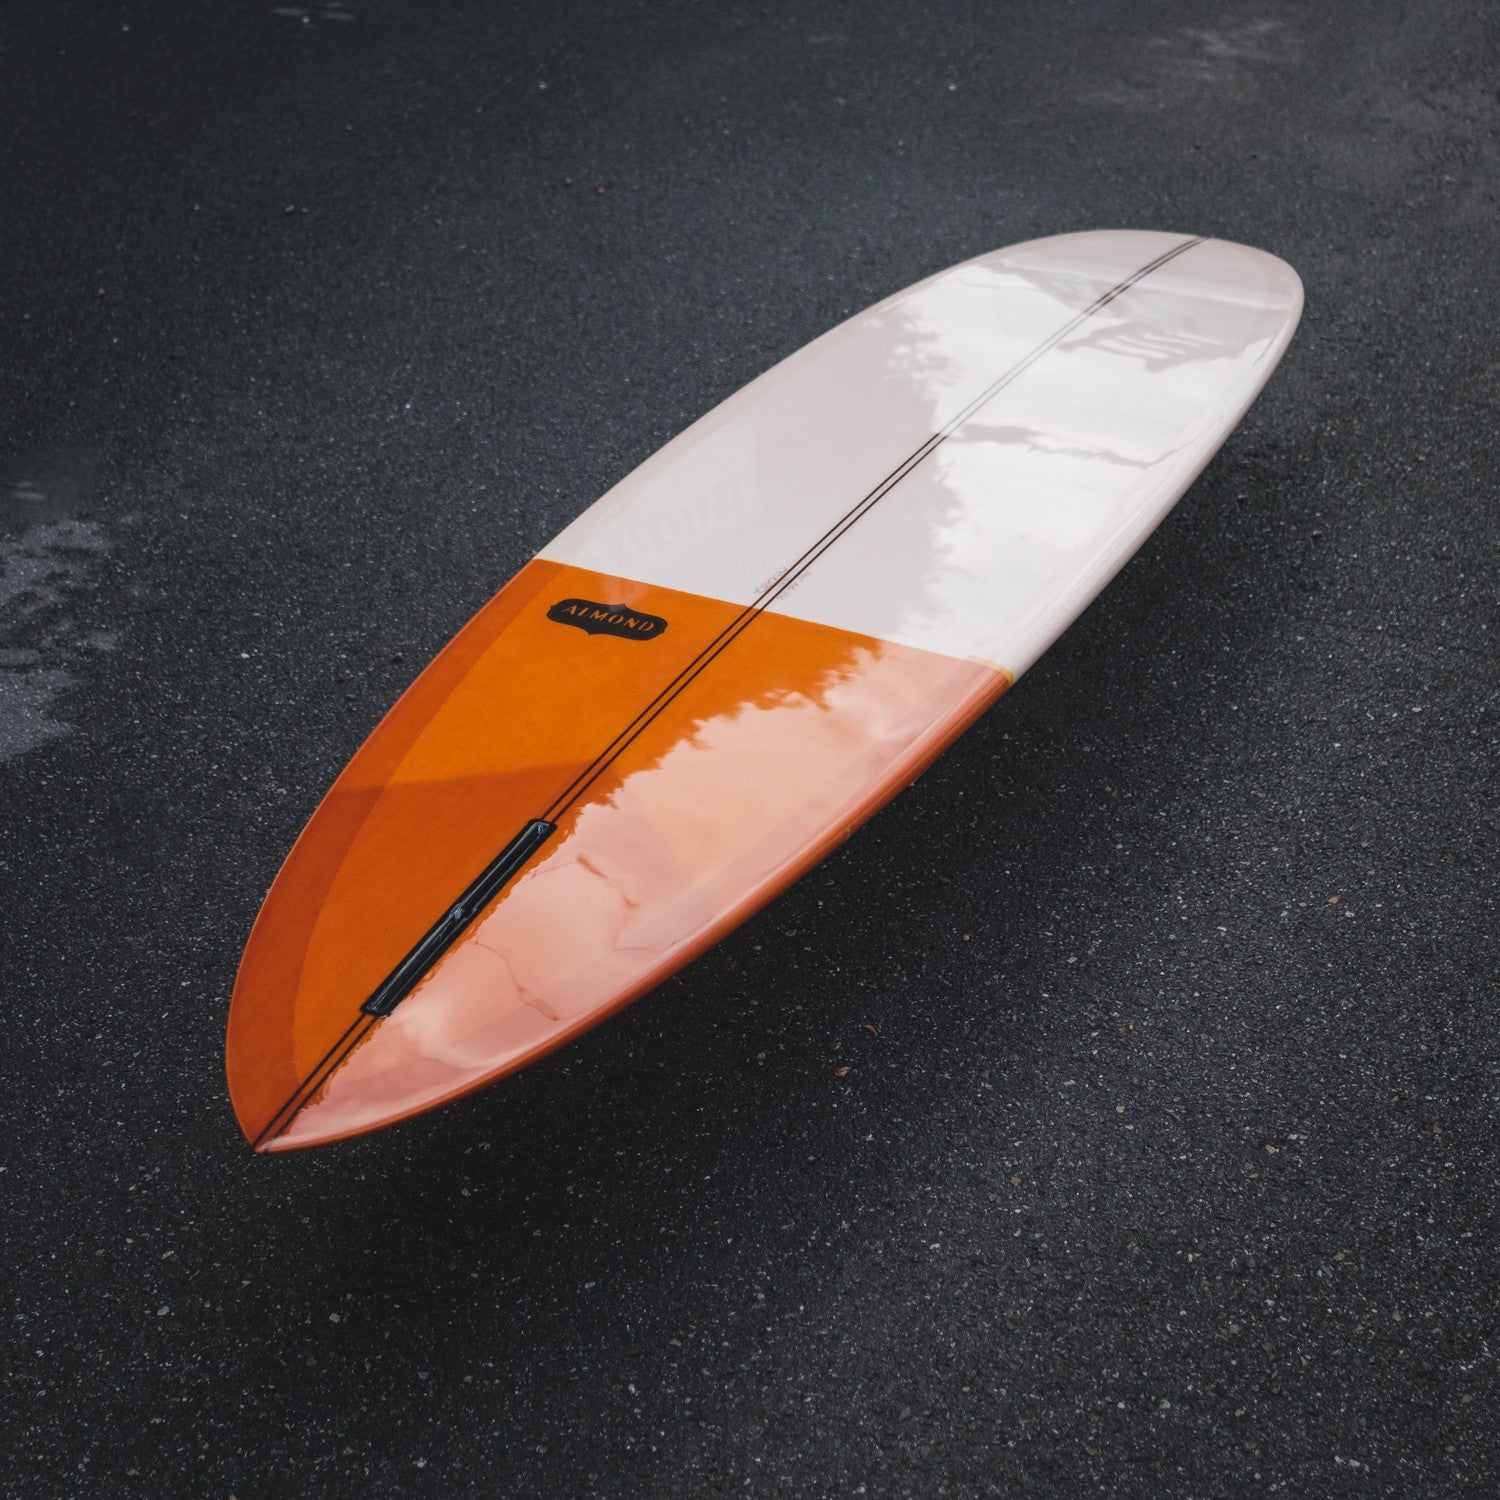 New Surfboards Every Week